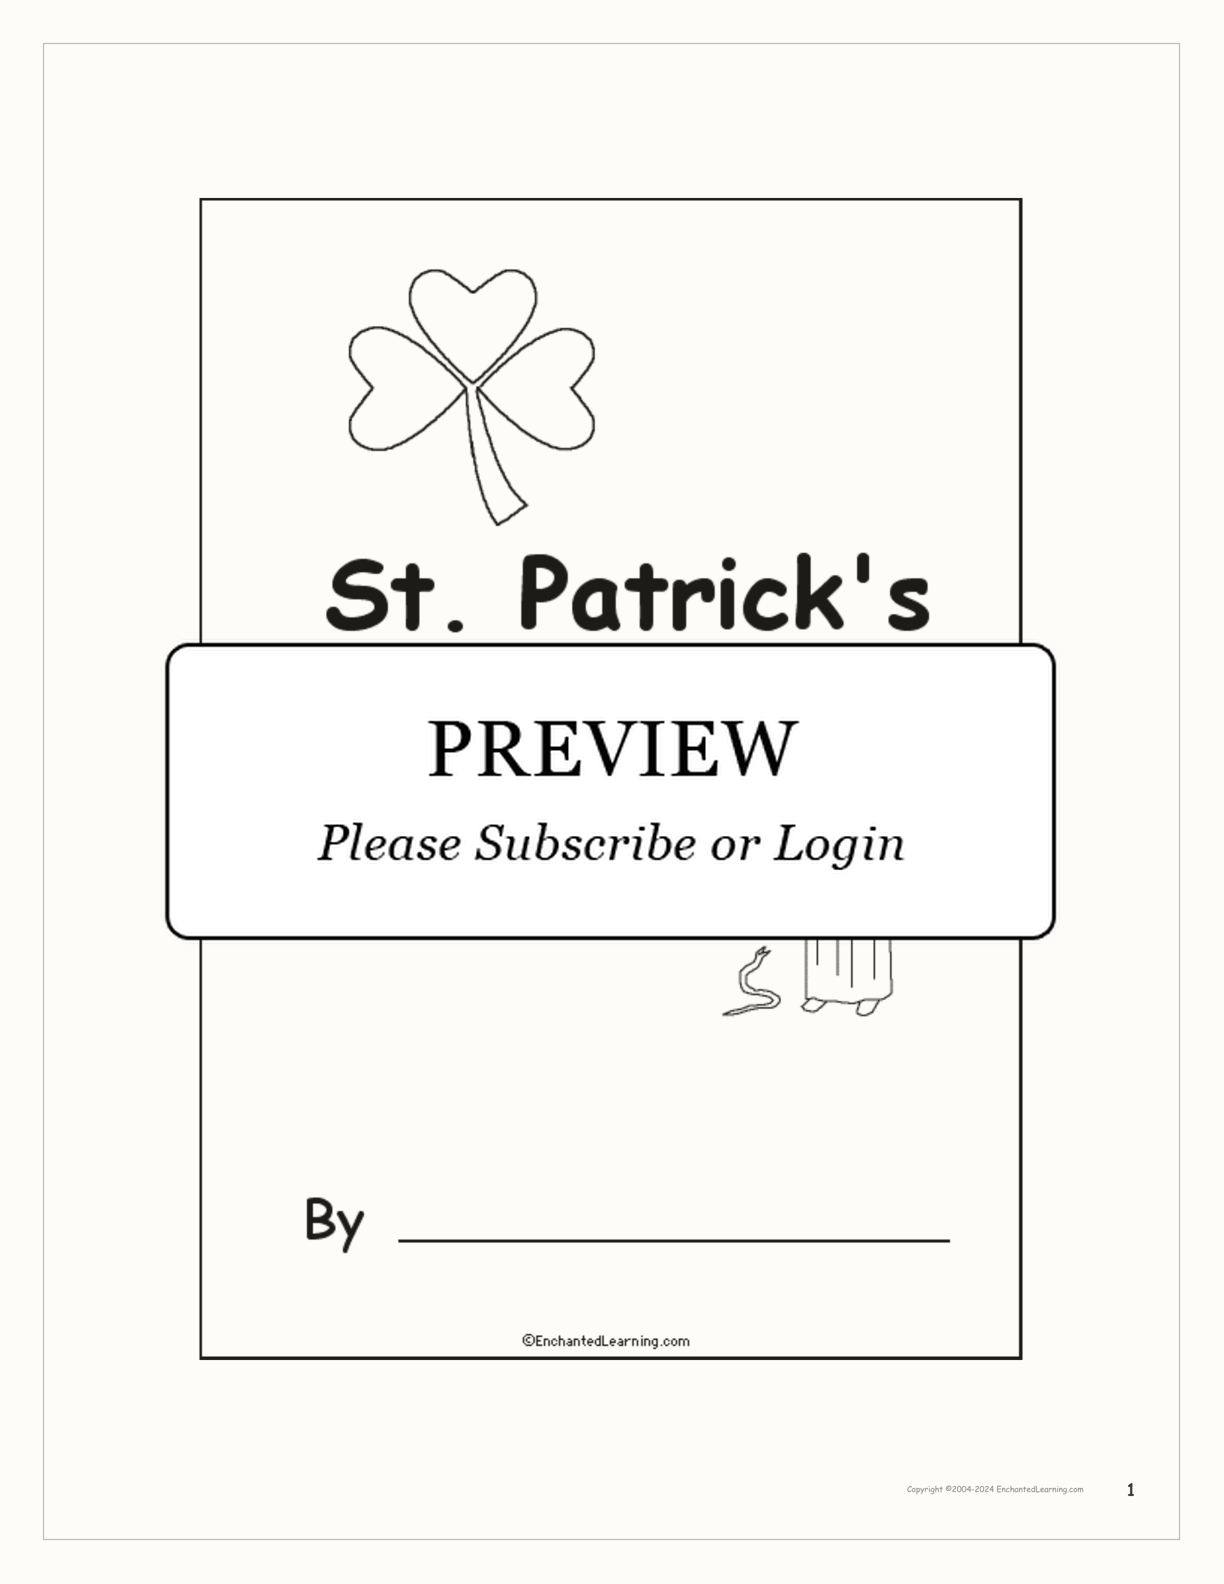 foldable-st-patrick-s-day-mini-book-one-page-made-by-teachers